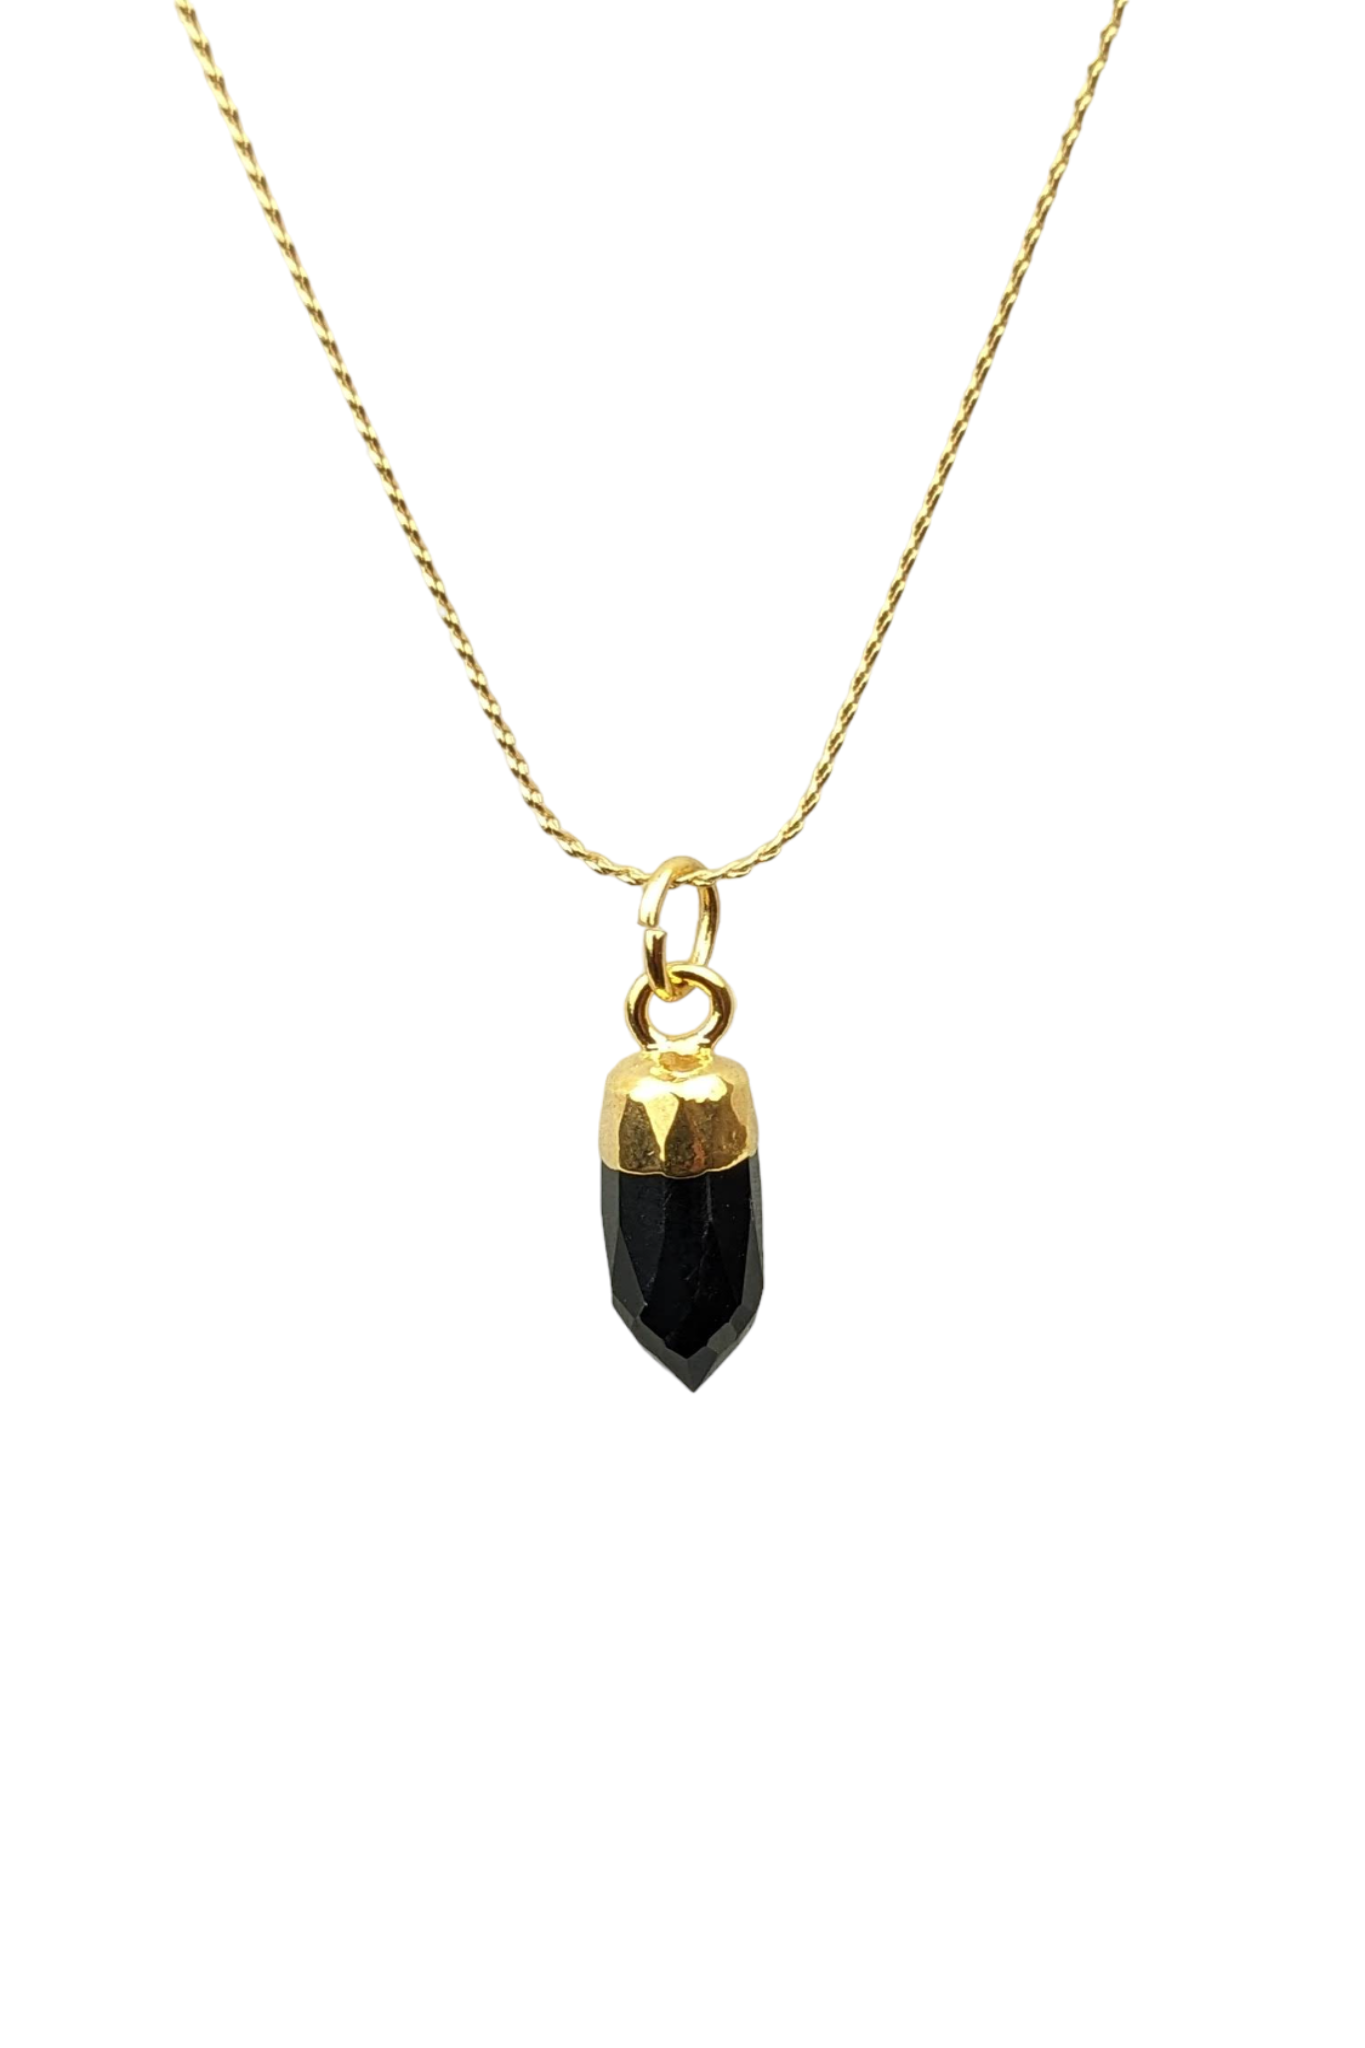 Psychic work - Akashic Records - Root Chakra necklace onyx pendant stay gold by mme bovary